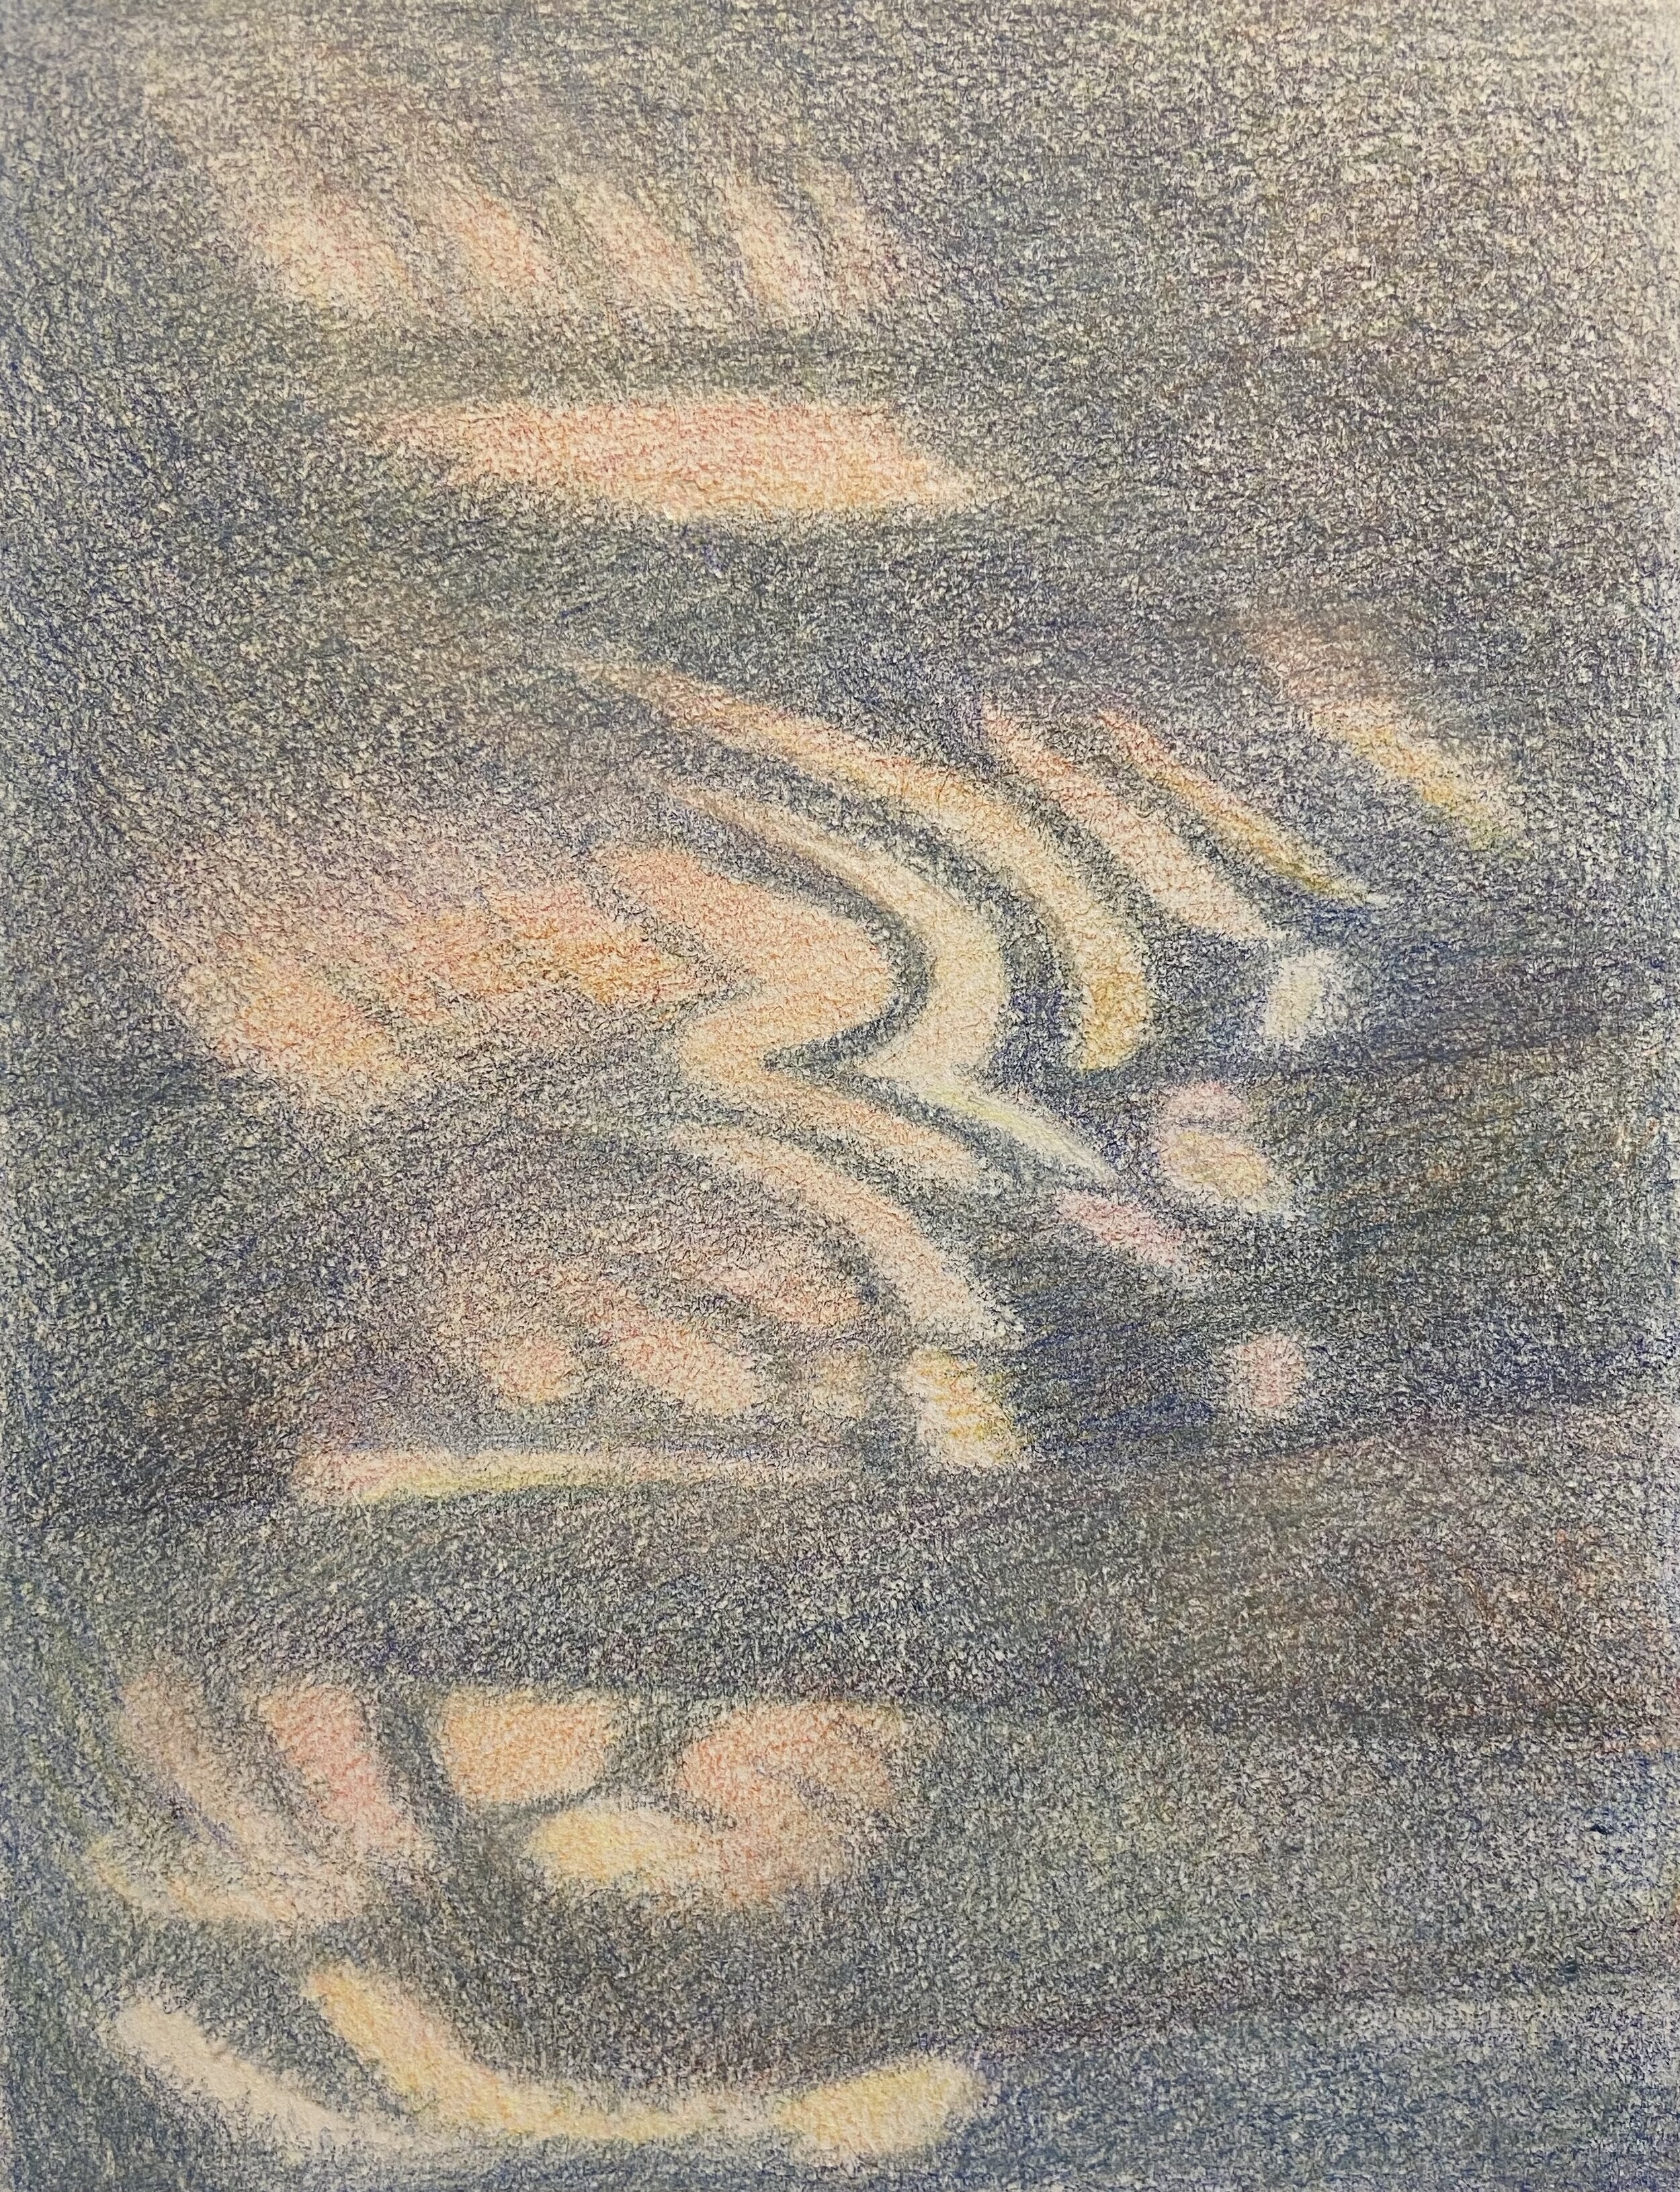 5 x 7 inches, colored pencil on paper, 2020